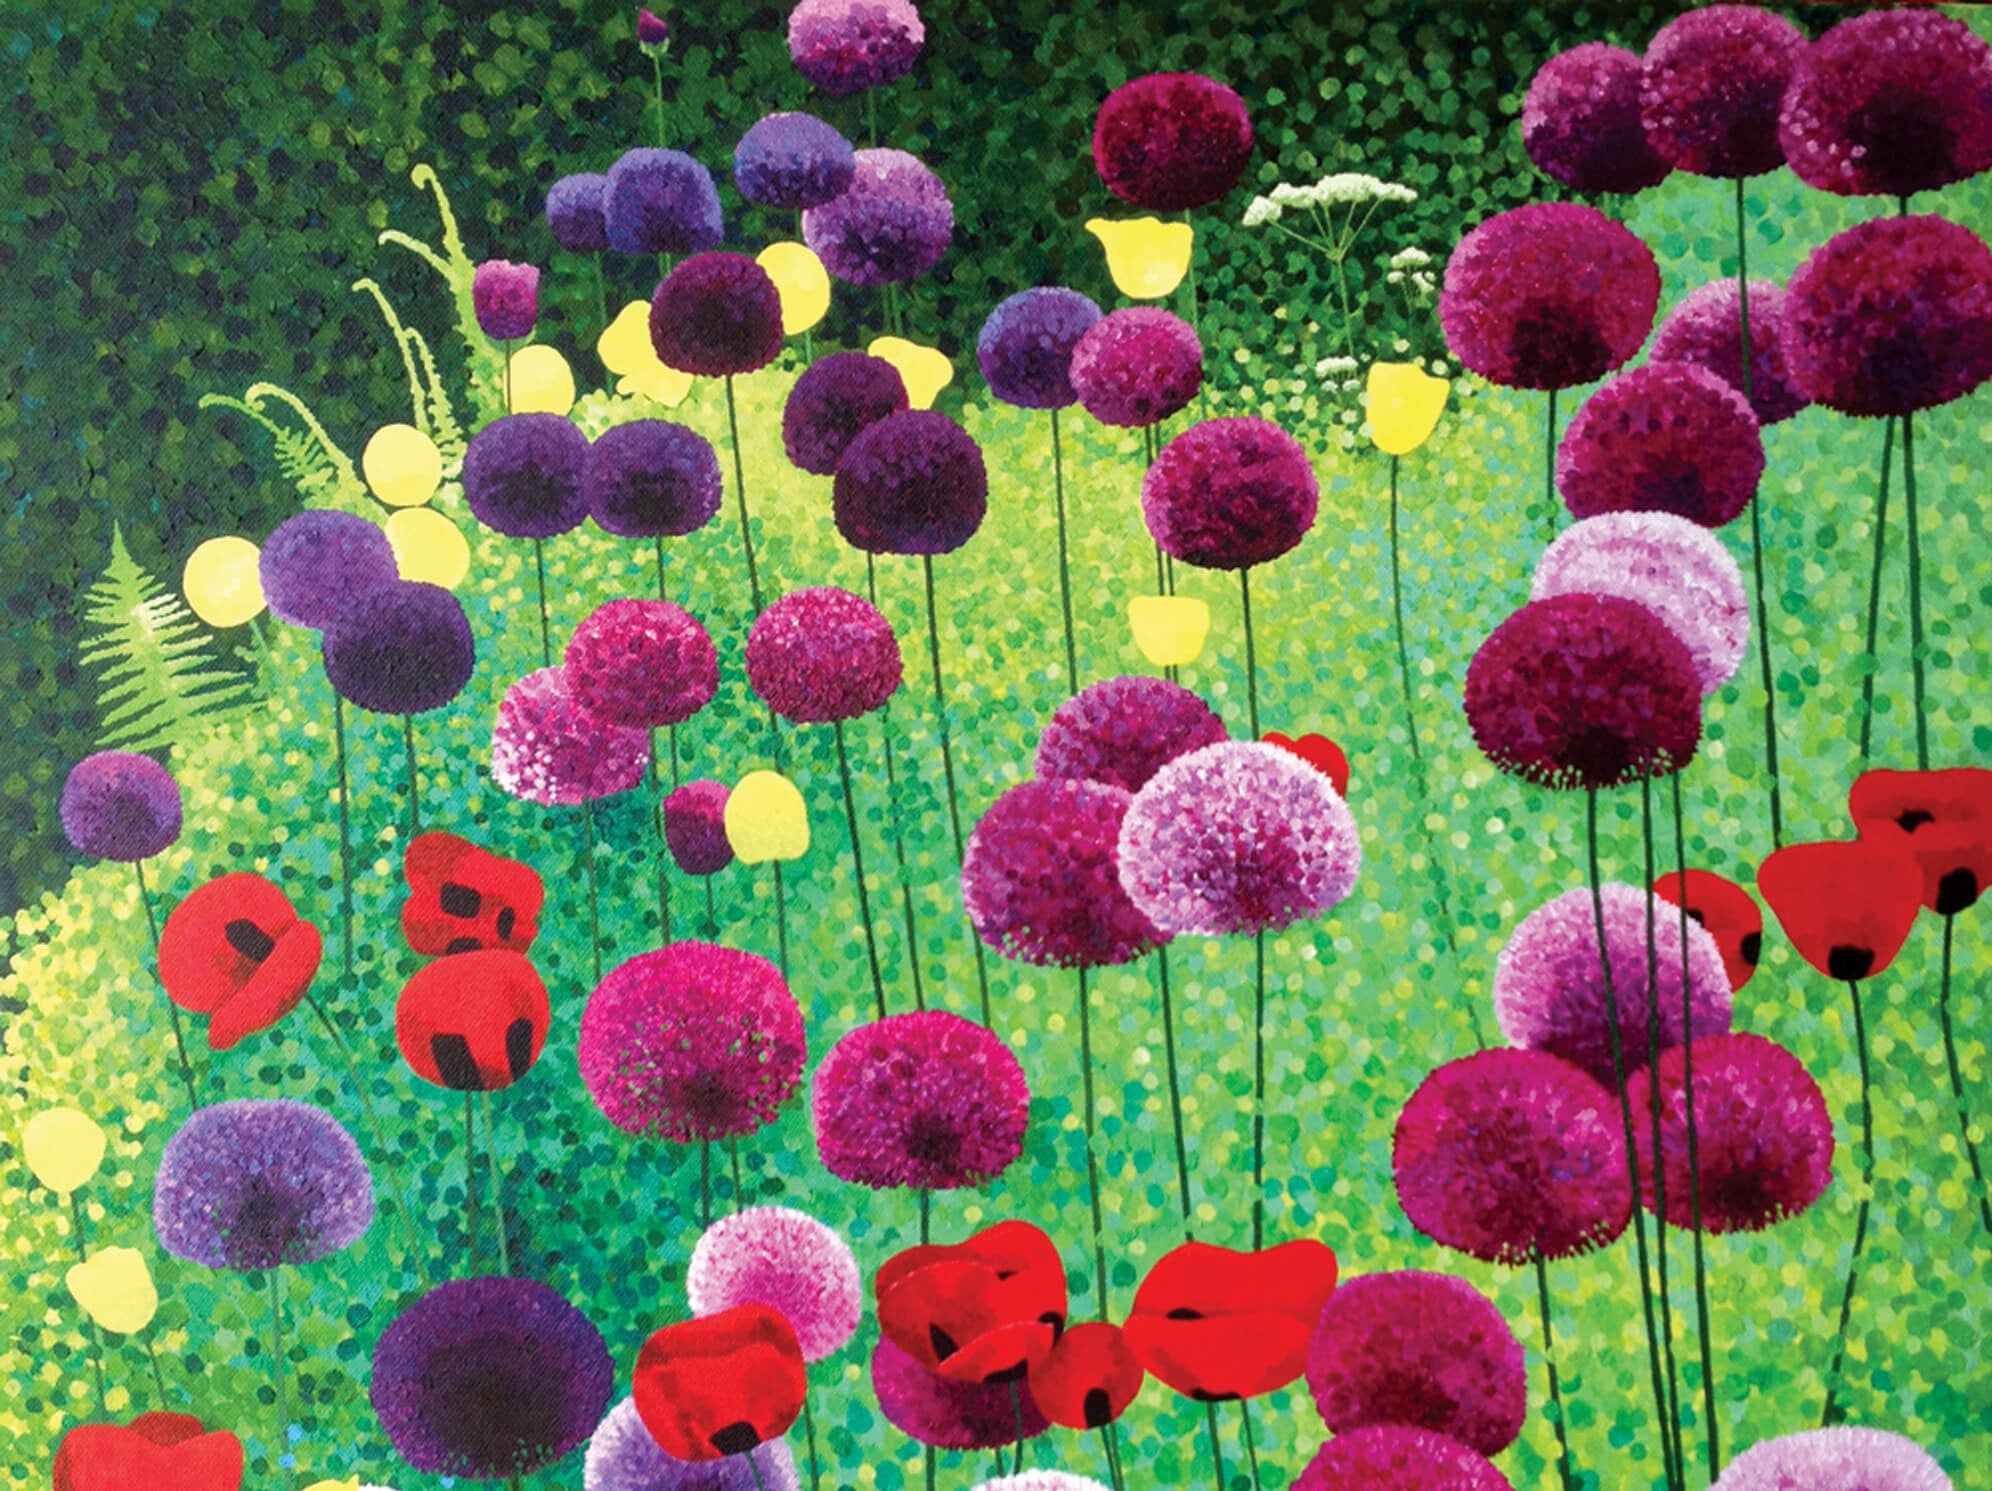 Alliums and Poppies by Susan Entwistle